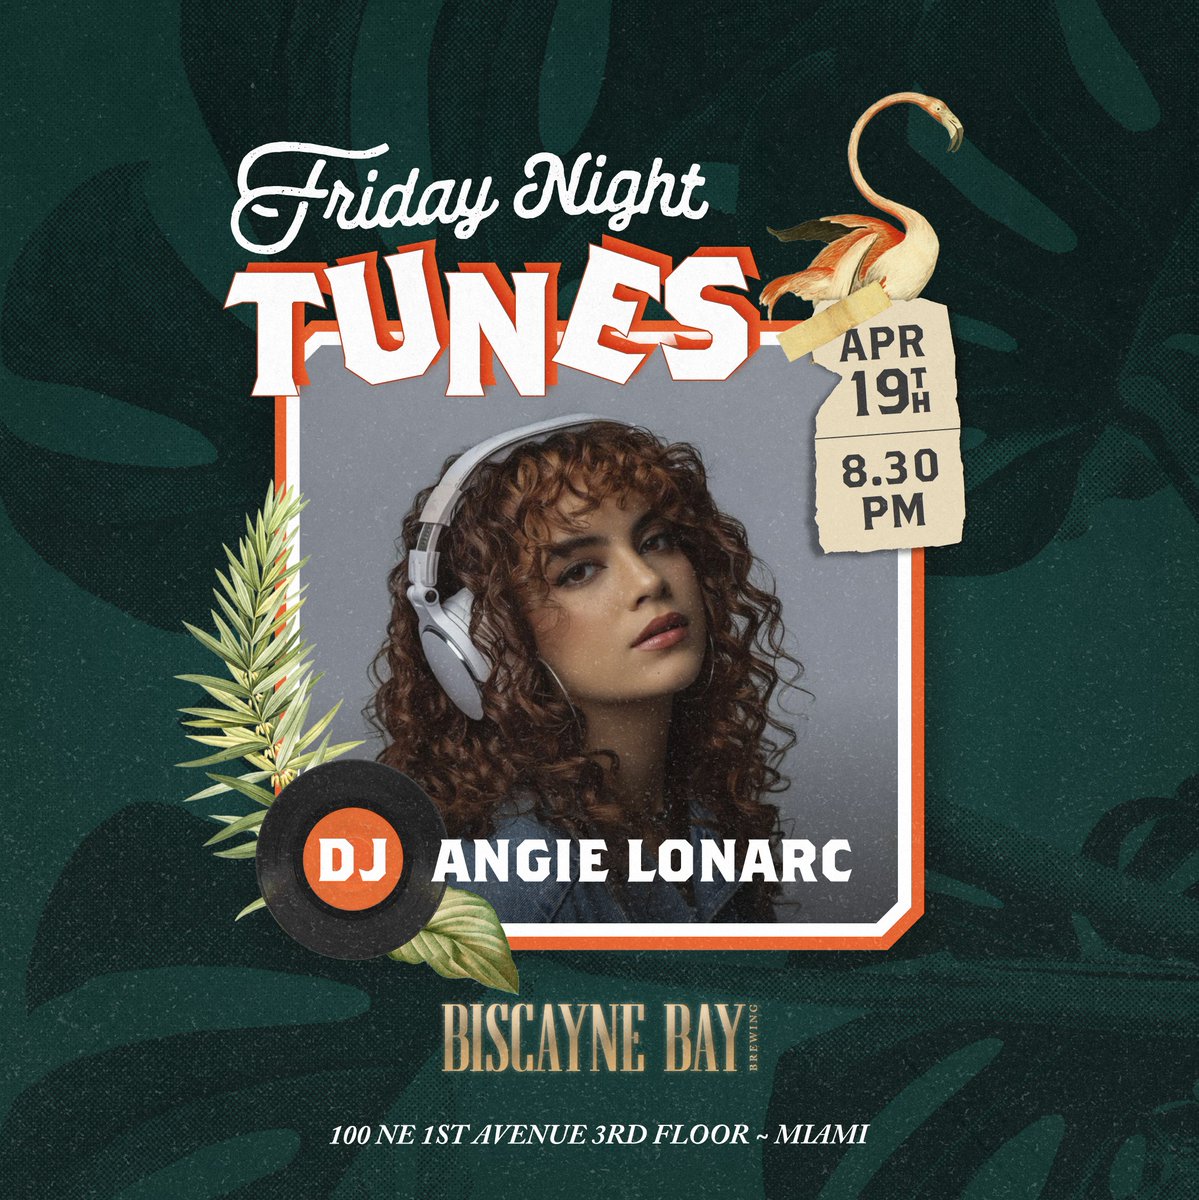 Friday Night is here and we've got the beats by DJ Angie Lonarc! 🎶 Happy hour from 4-7 PM tonight!

#thingstodoinmiami #thingstodoindowntownmiami #HappyHourMiami #brickellliving
#downtownmiami